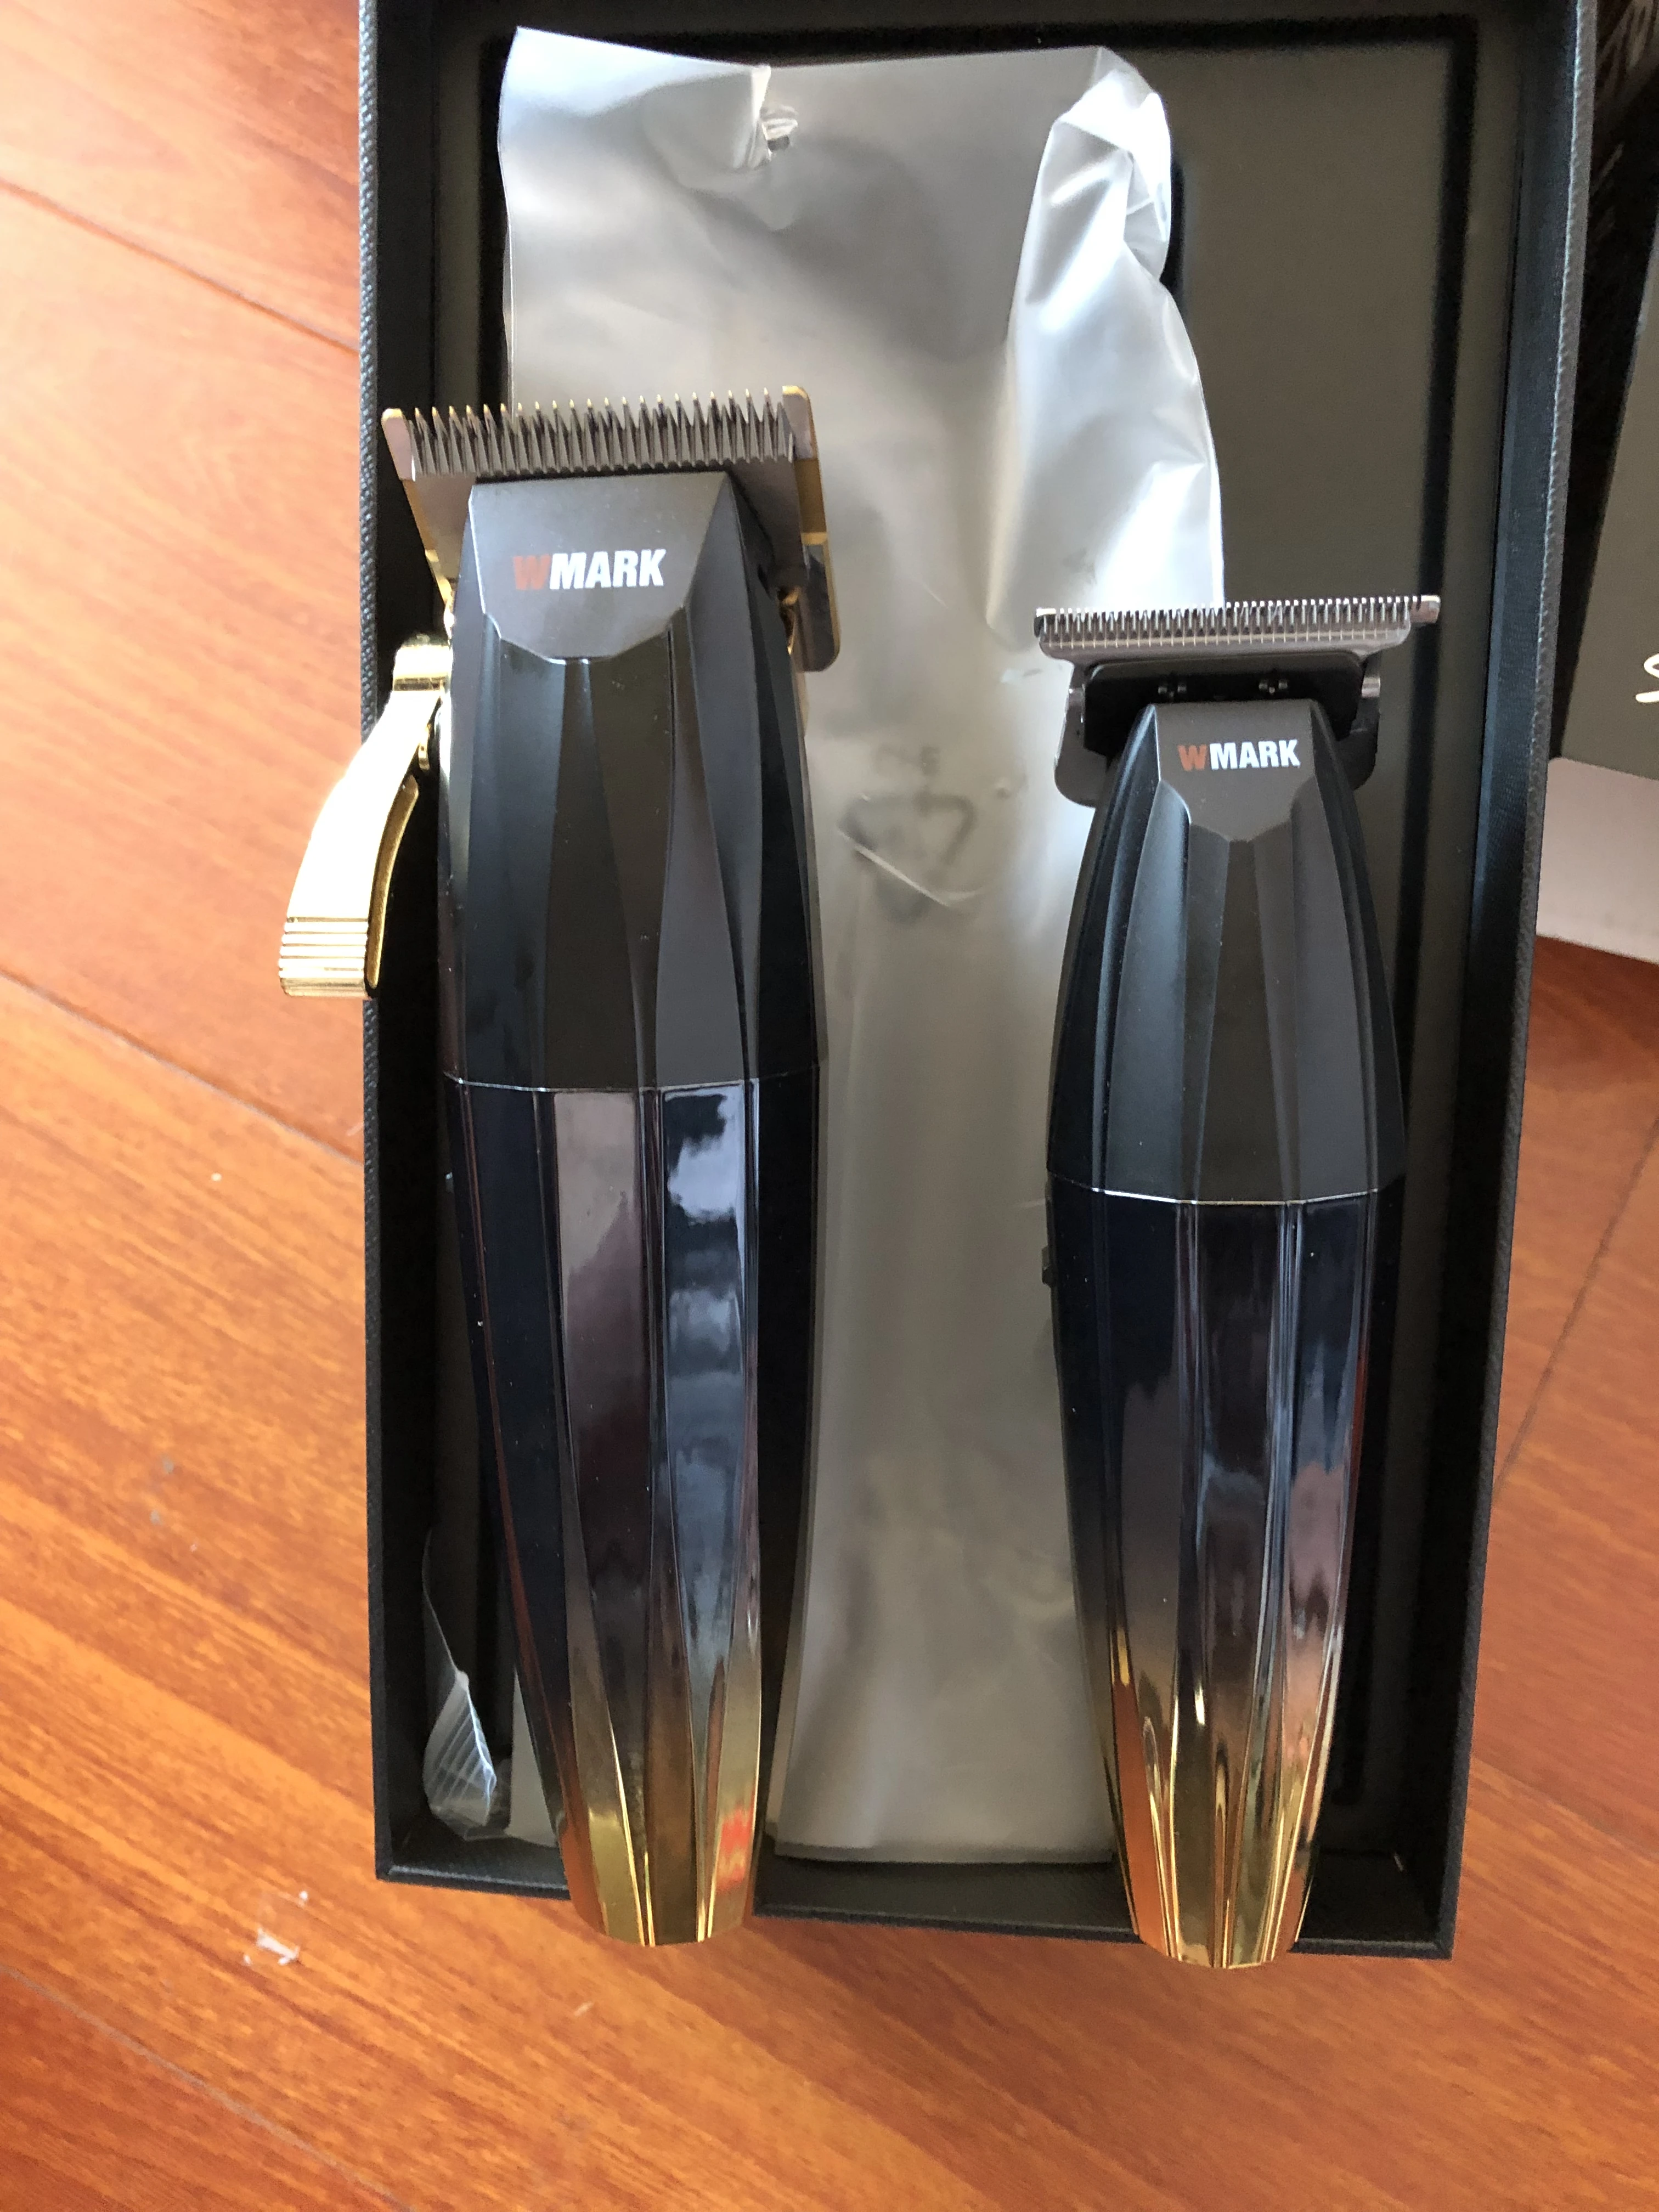 HomeCut® Combo Hair Clipper and Trimmer